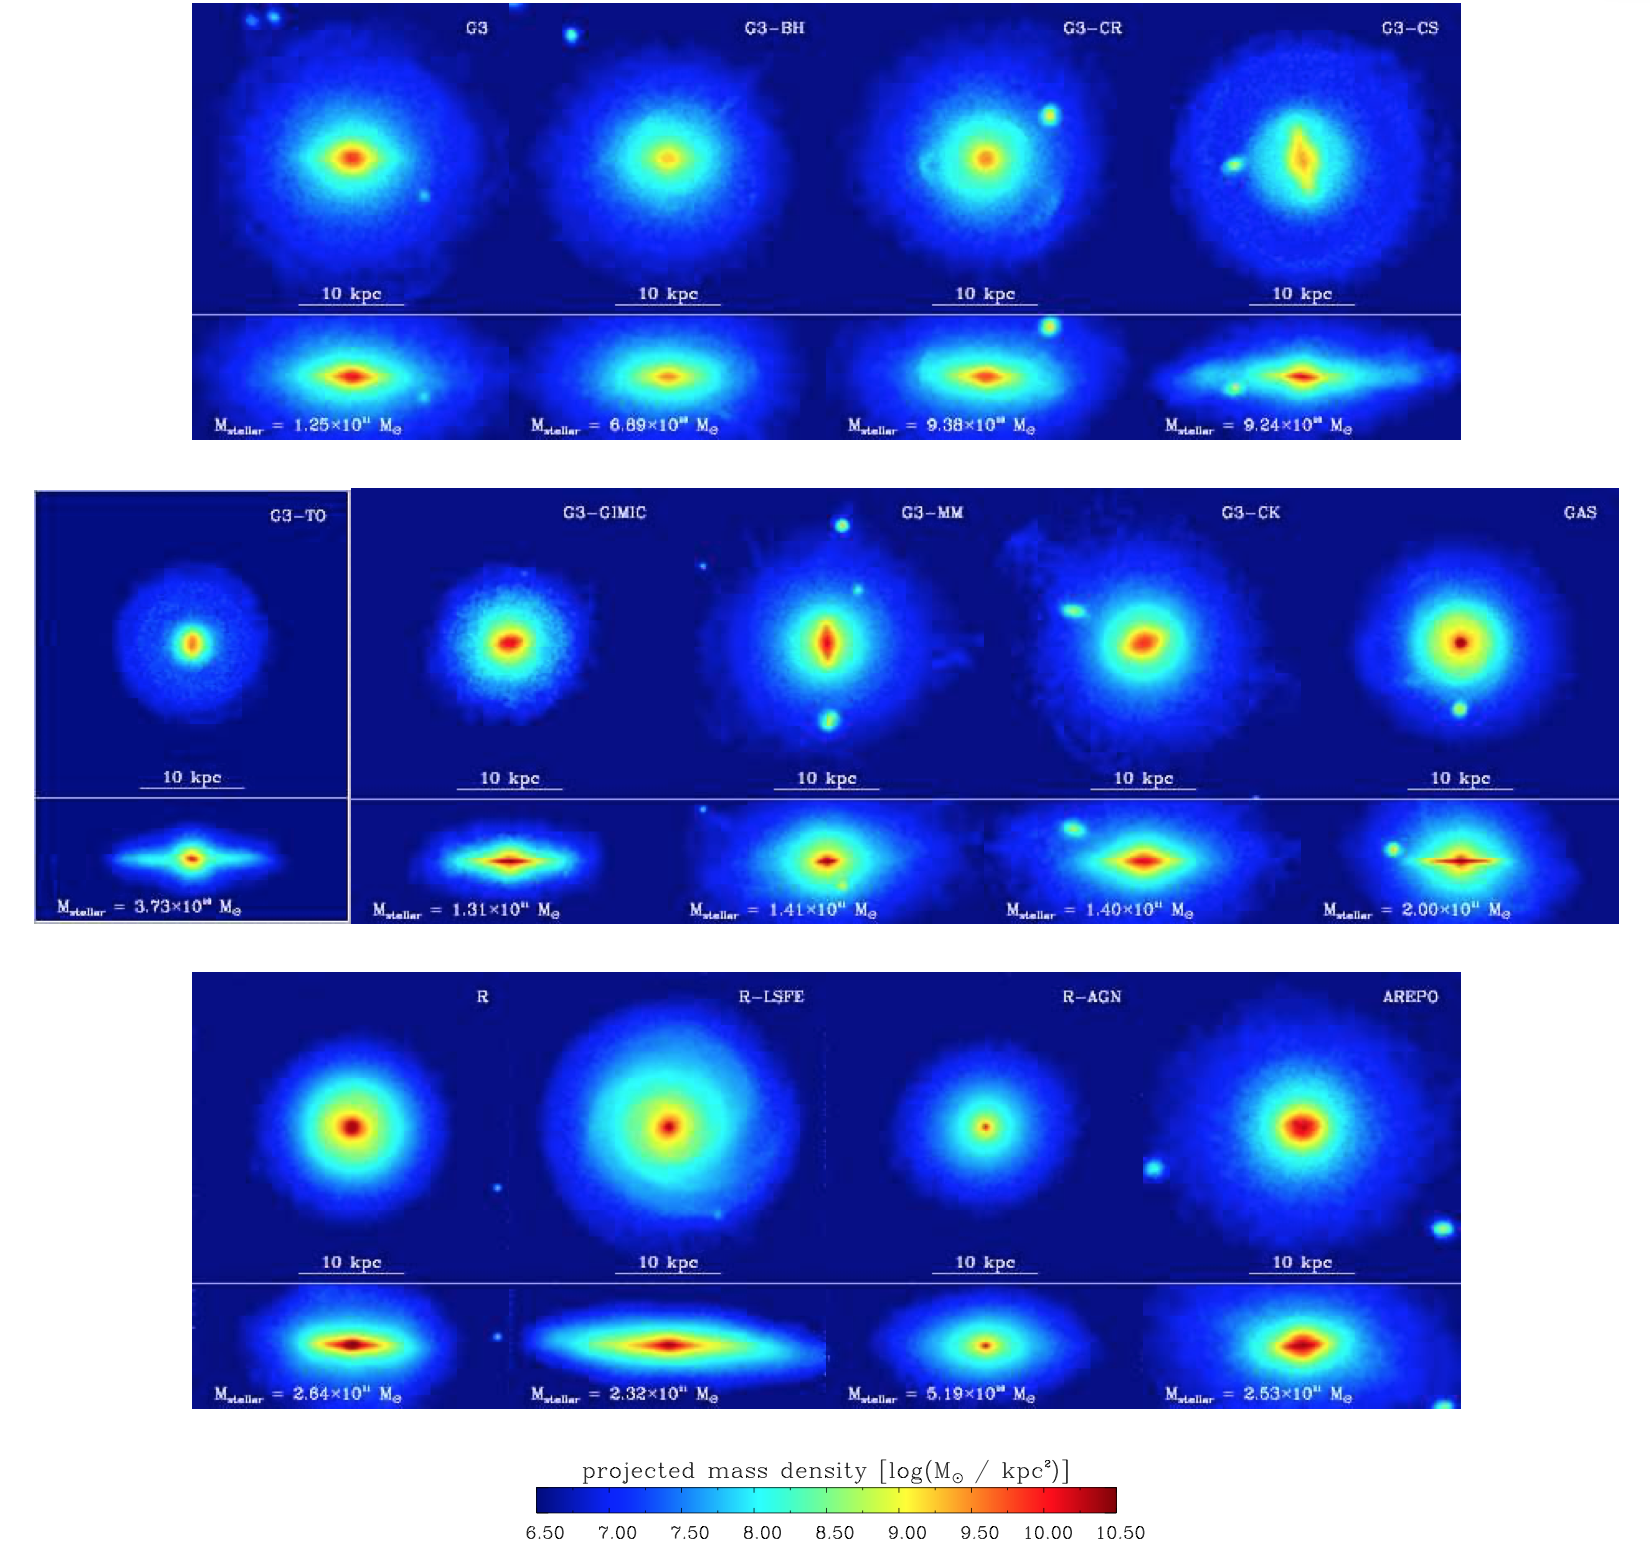 Face-on and edge-on maps of projected stellar mass density.